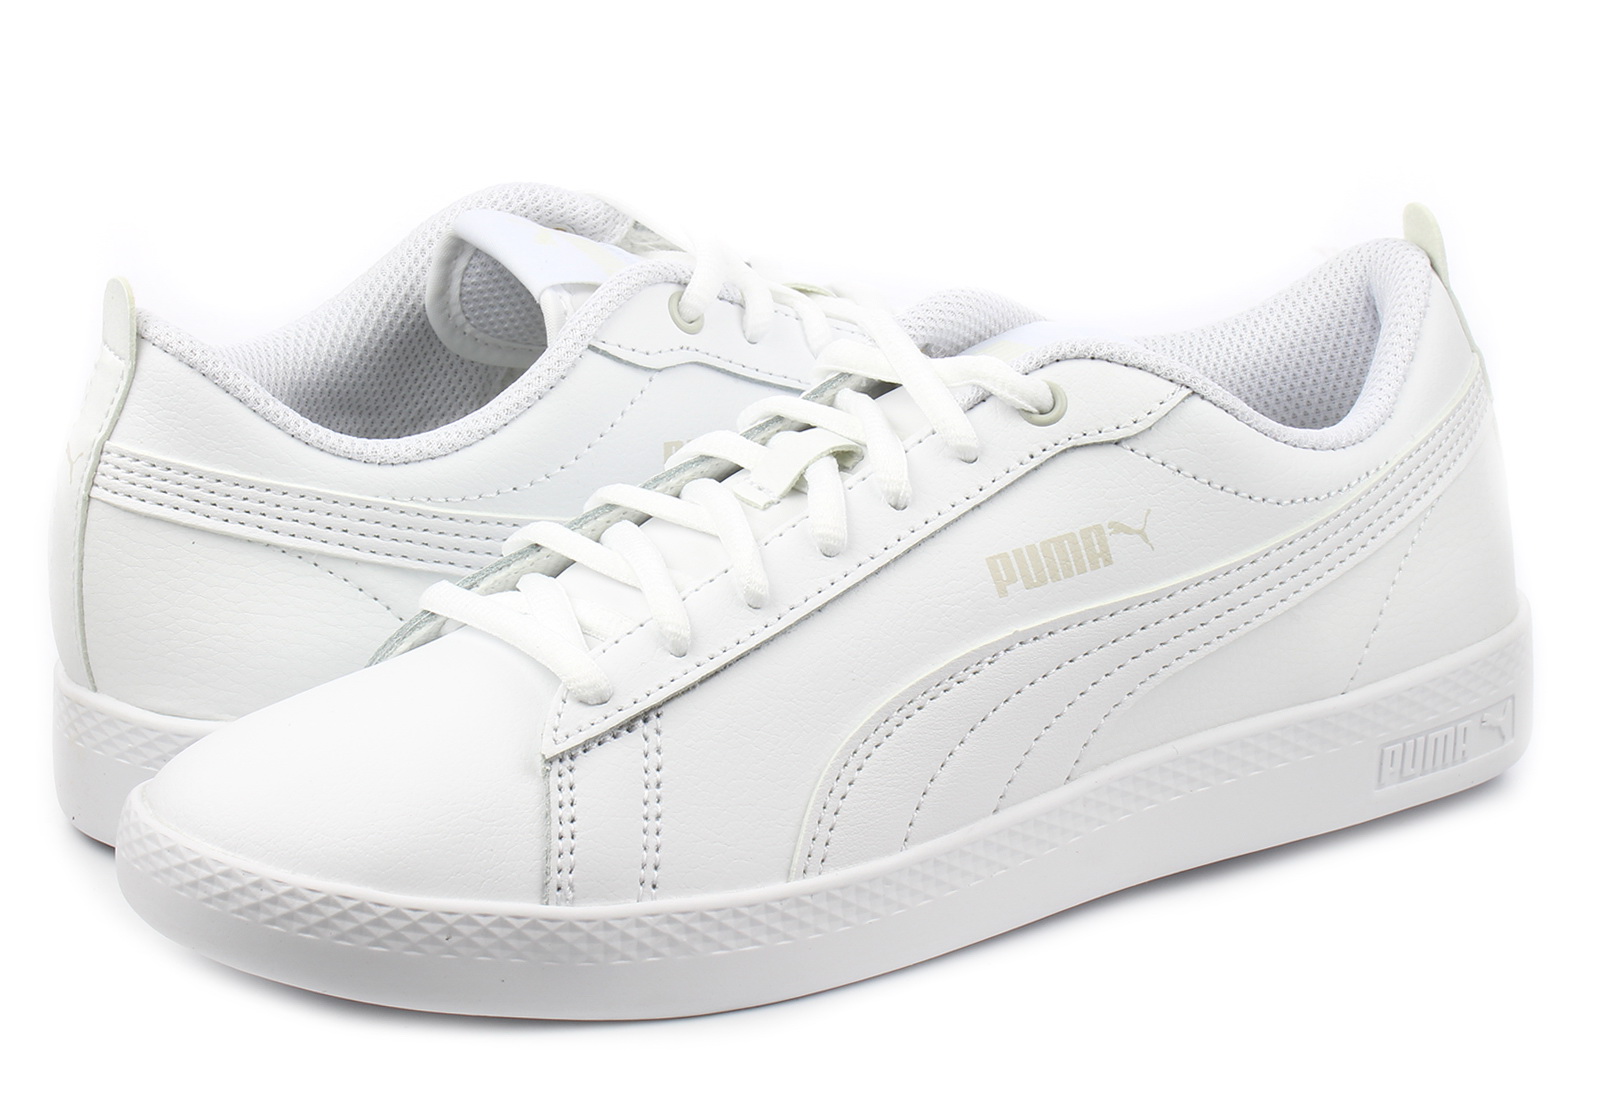 wasserette hek Korting Puma Trainers - Puma Smash Wns V2 L - 36520804-wht - Online shop for  sneakers, shoes and boots